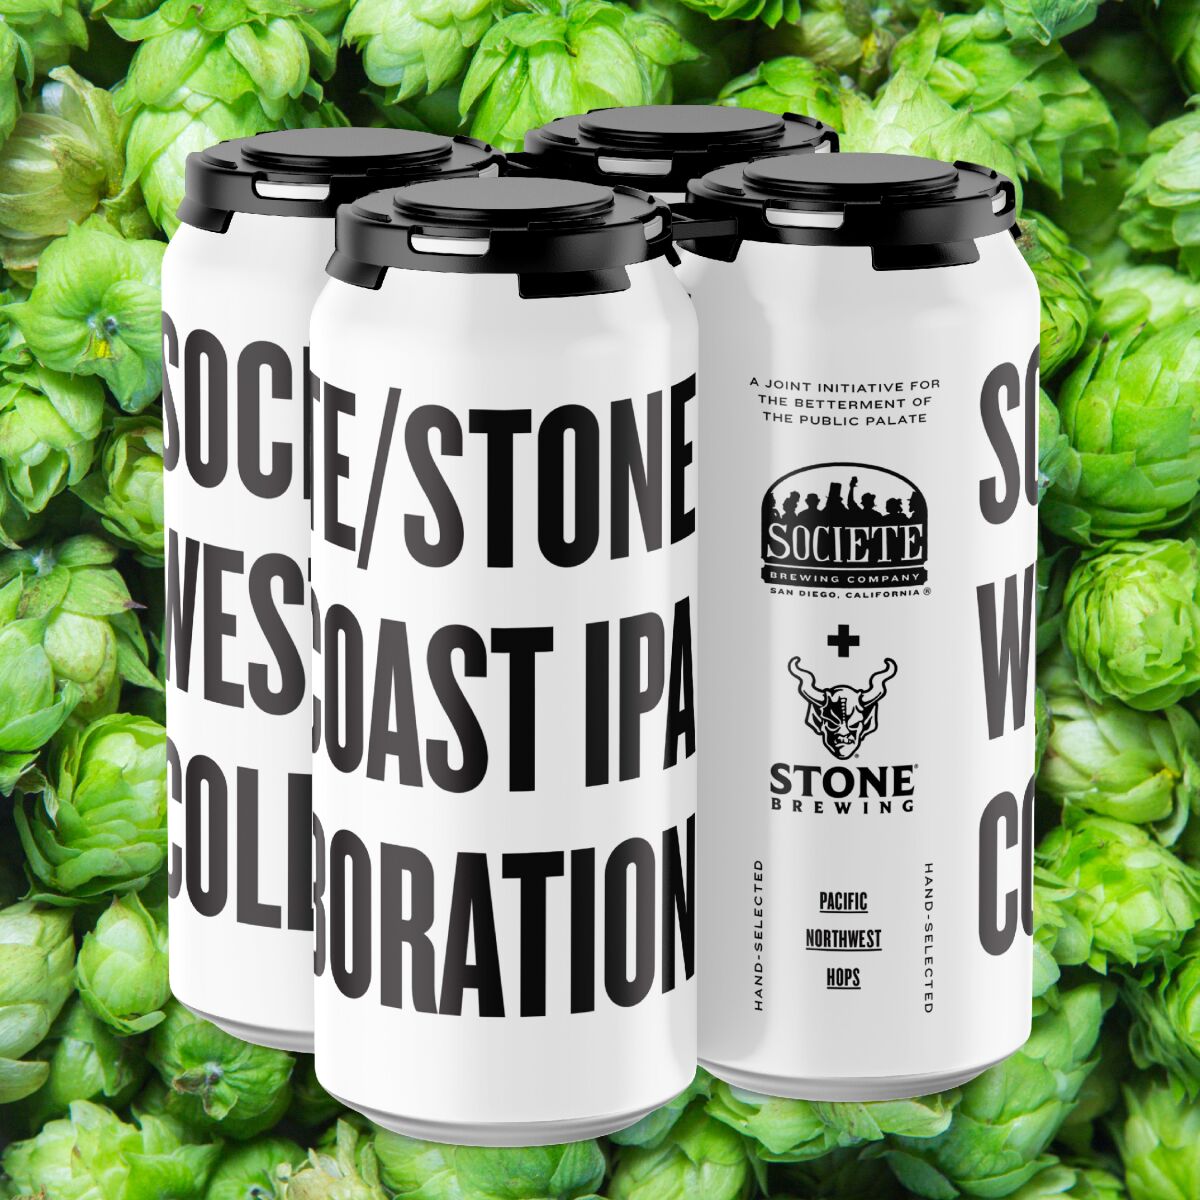 Societe x Stone West Coast IPA Collaboration is available in a four-pack for $13.